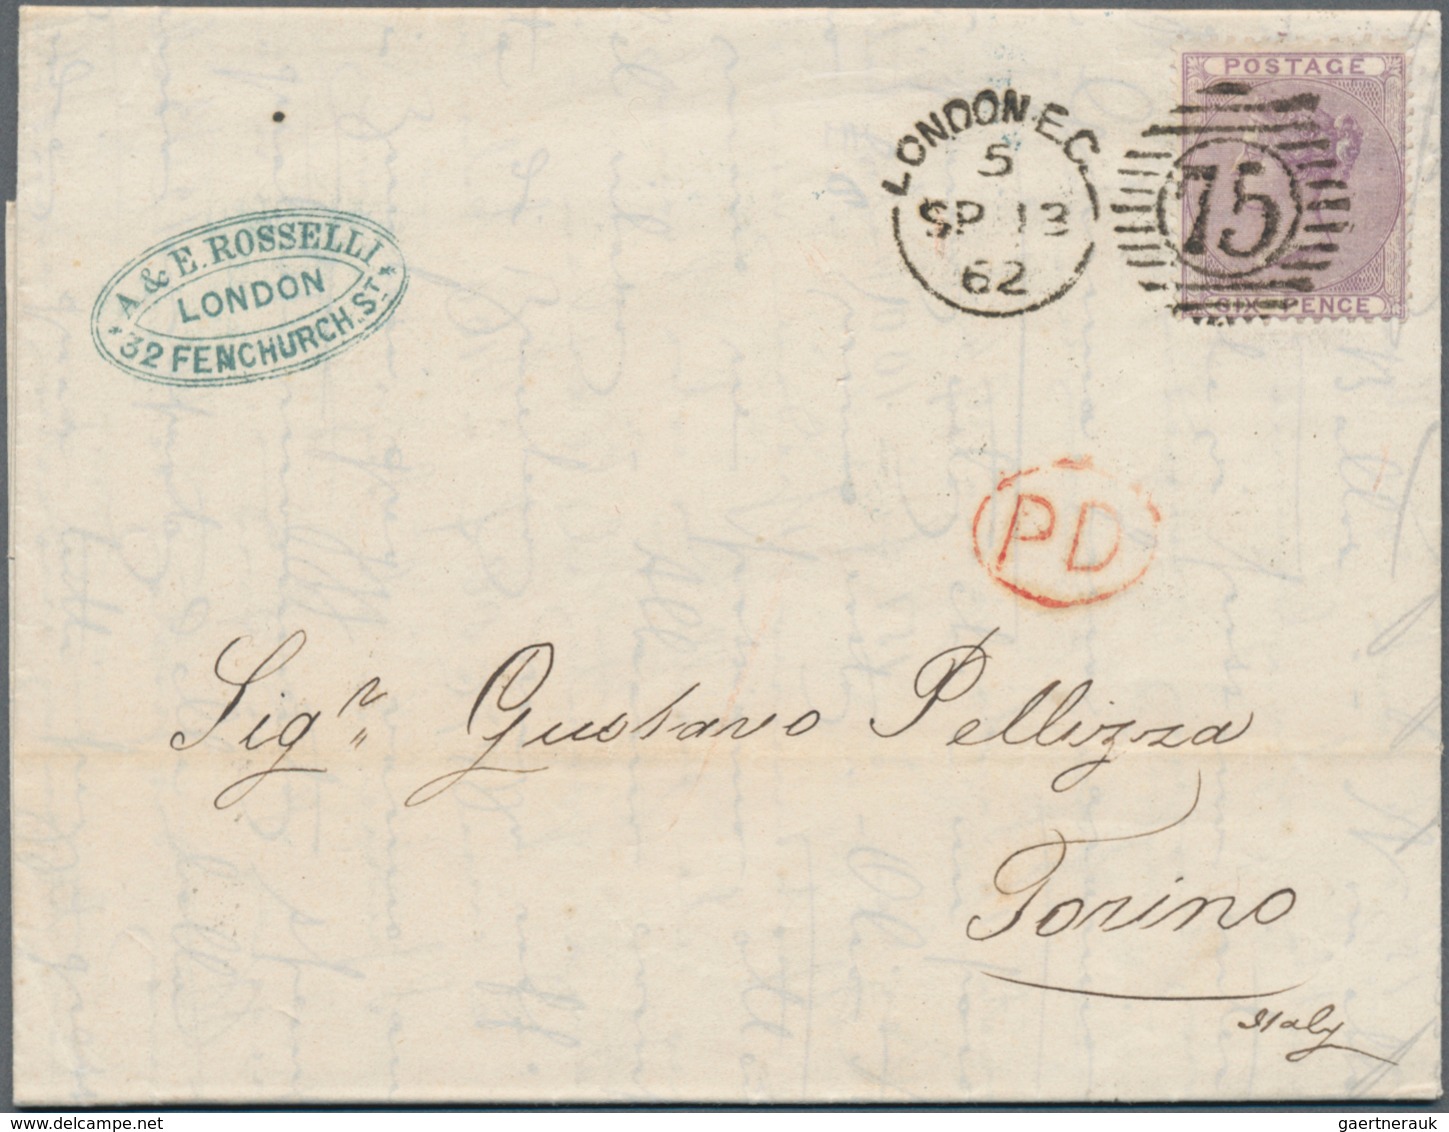 Europa: 1862/1978, holding of ca. 430 letters, service letters, printed matter, cards, ppc and used